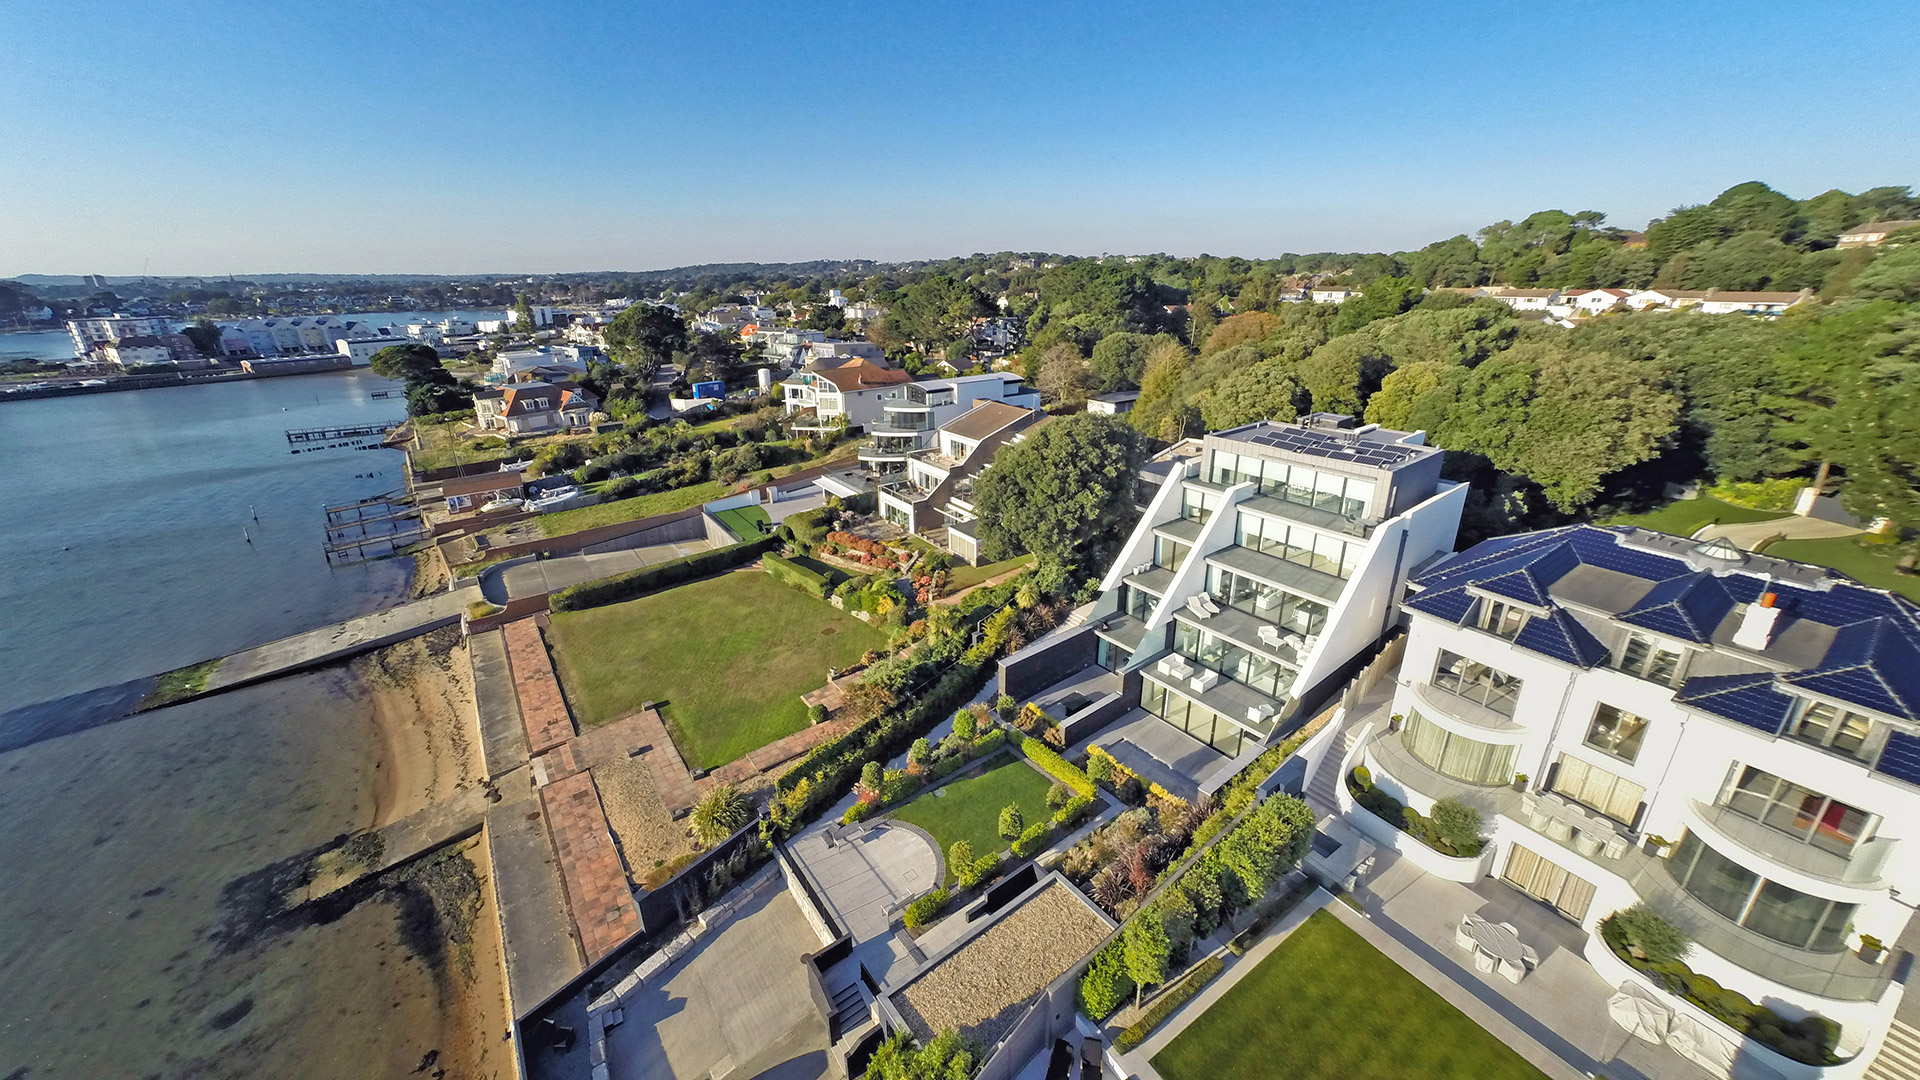 aerial view of large modern properties with gardens backing onto the seafront